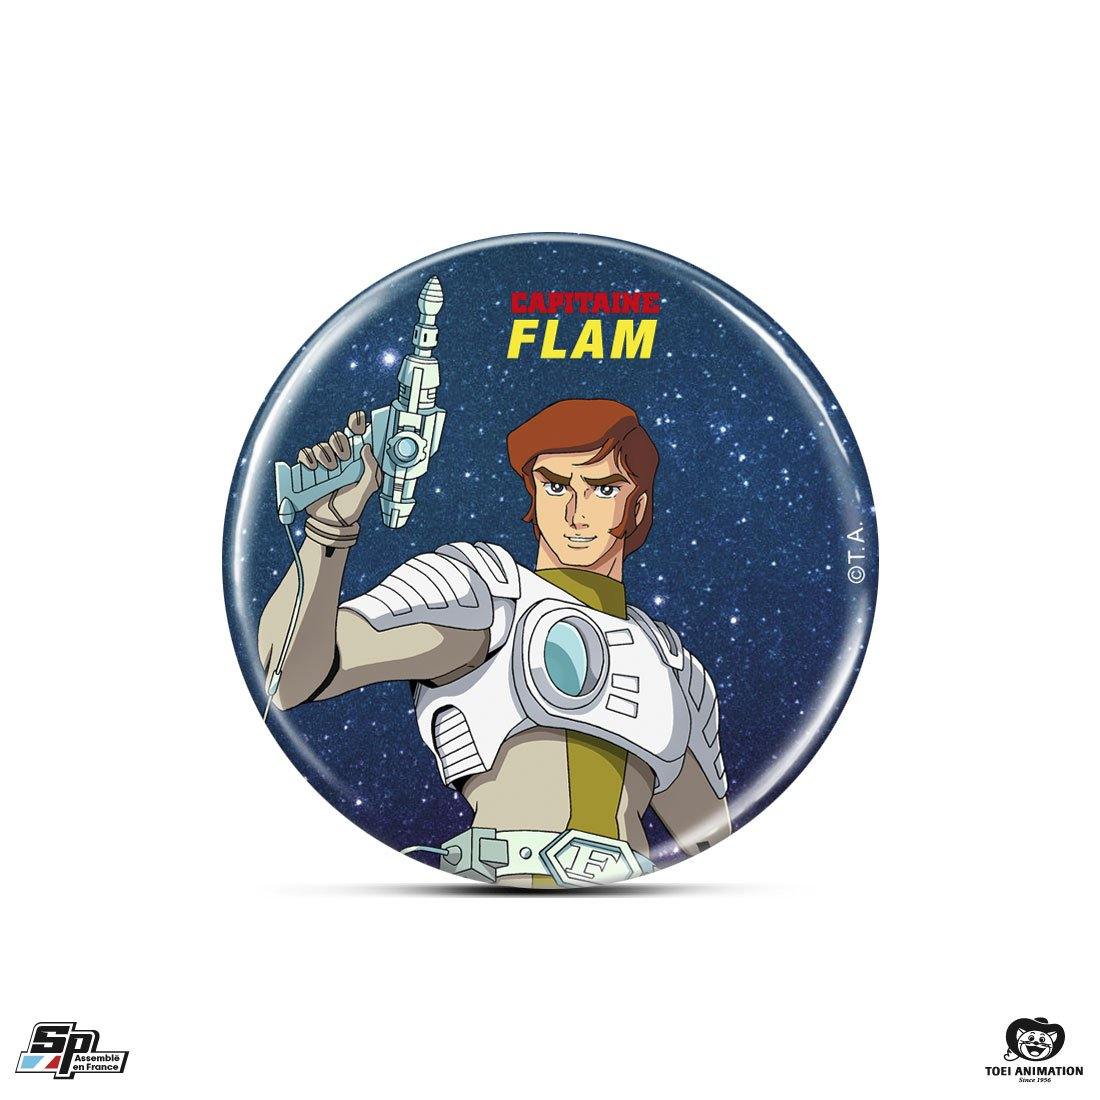 Badge blister Capitaine Flam - superpins